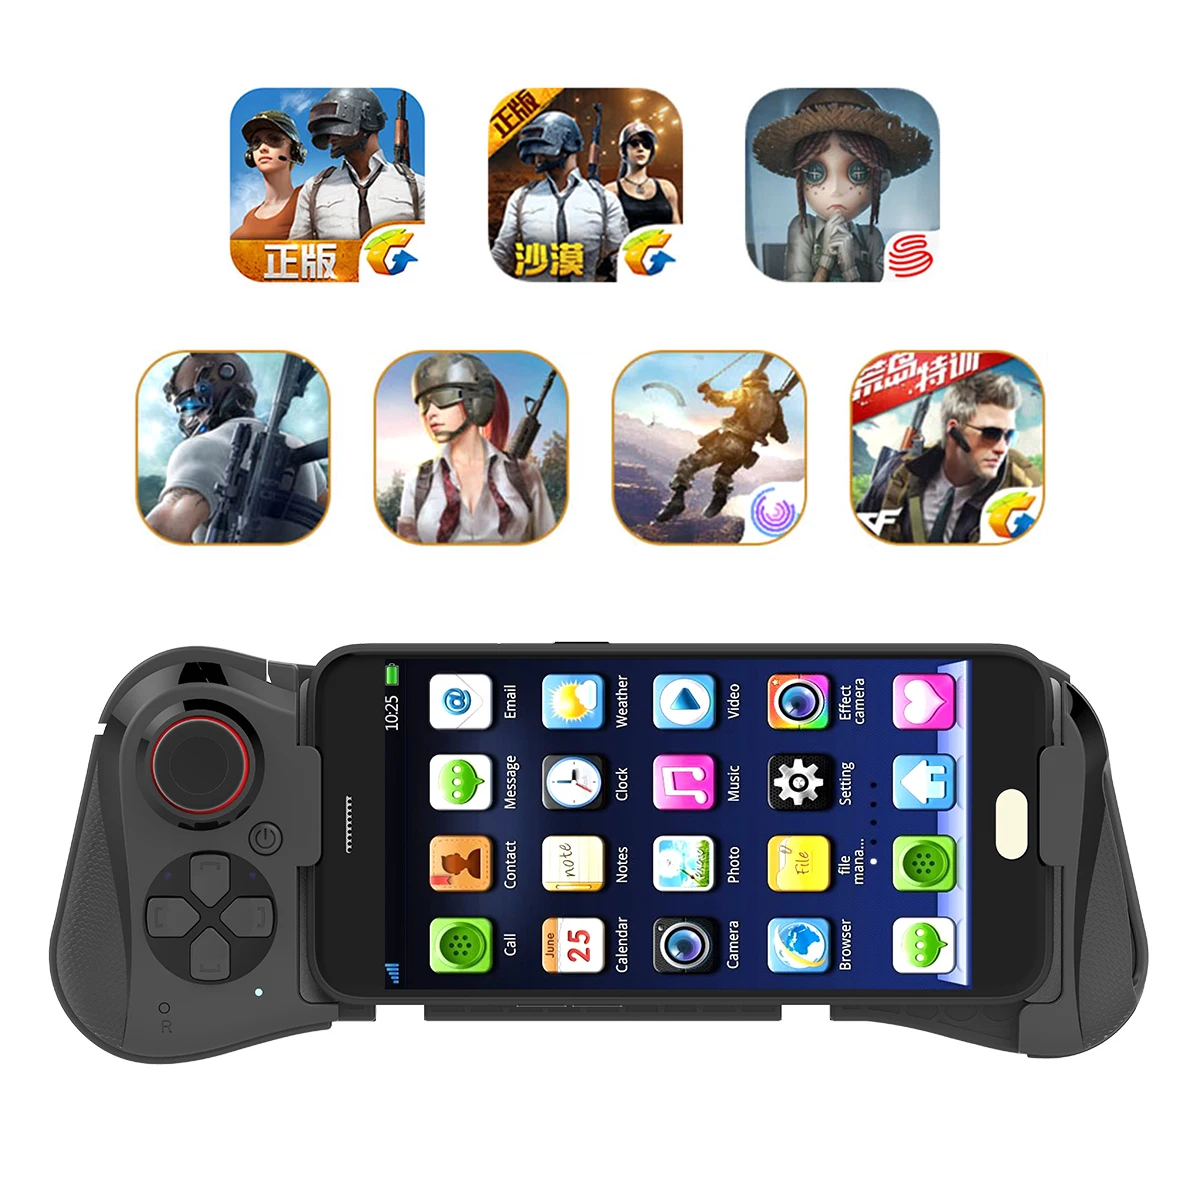 

MOCUTE 058 Gamepad For Android iOS PC PUBG Mobile Phone Wireless Bluetooth Game Controller Joystick Sensitive Gamepads